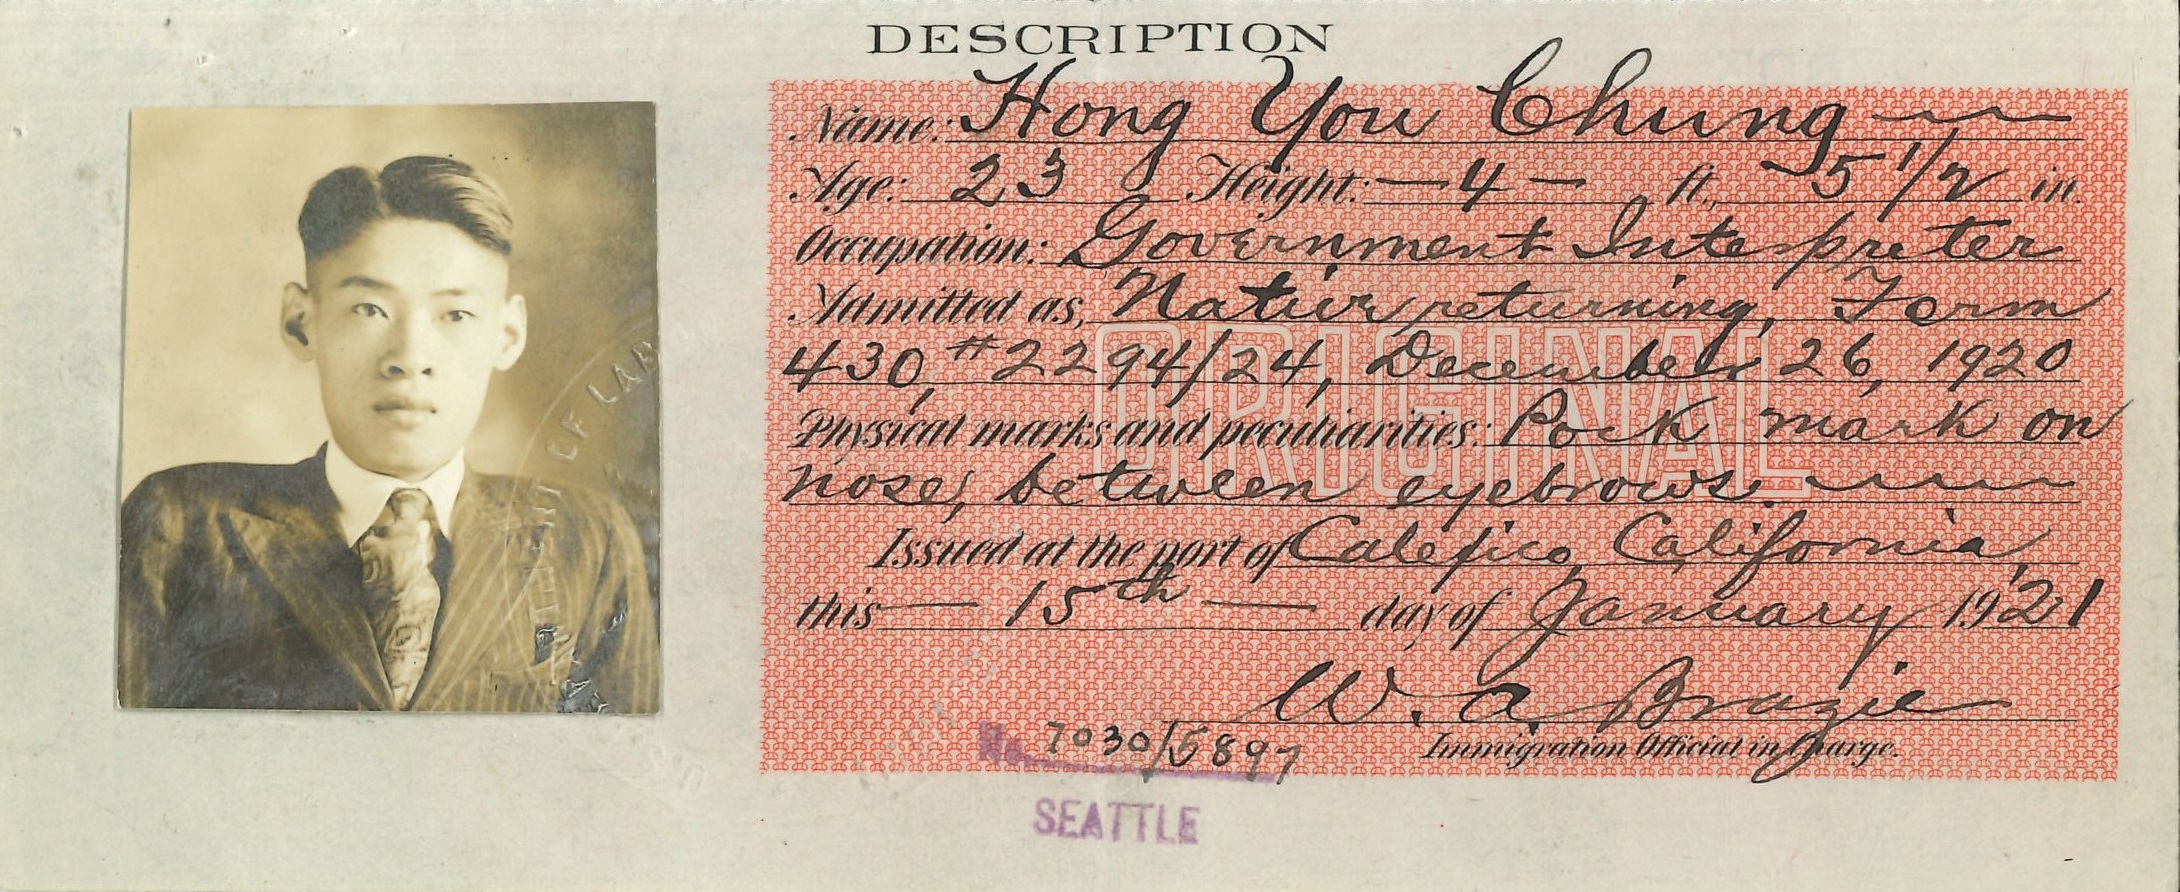 Y. C. Hong's certificate of identity, required for all Chinese in the U.S. for identification and tracking purposes (1921)